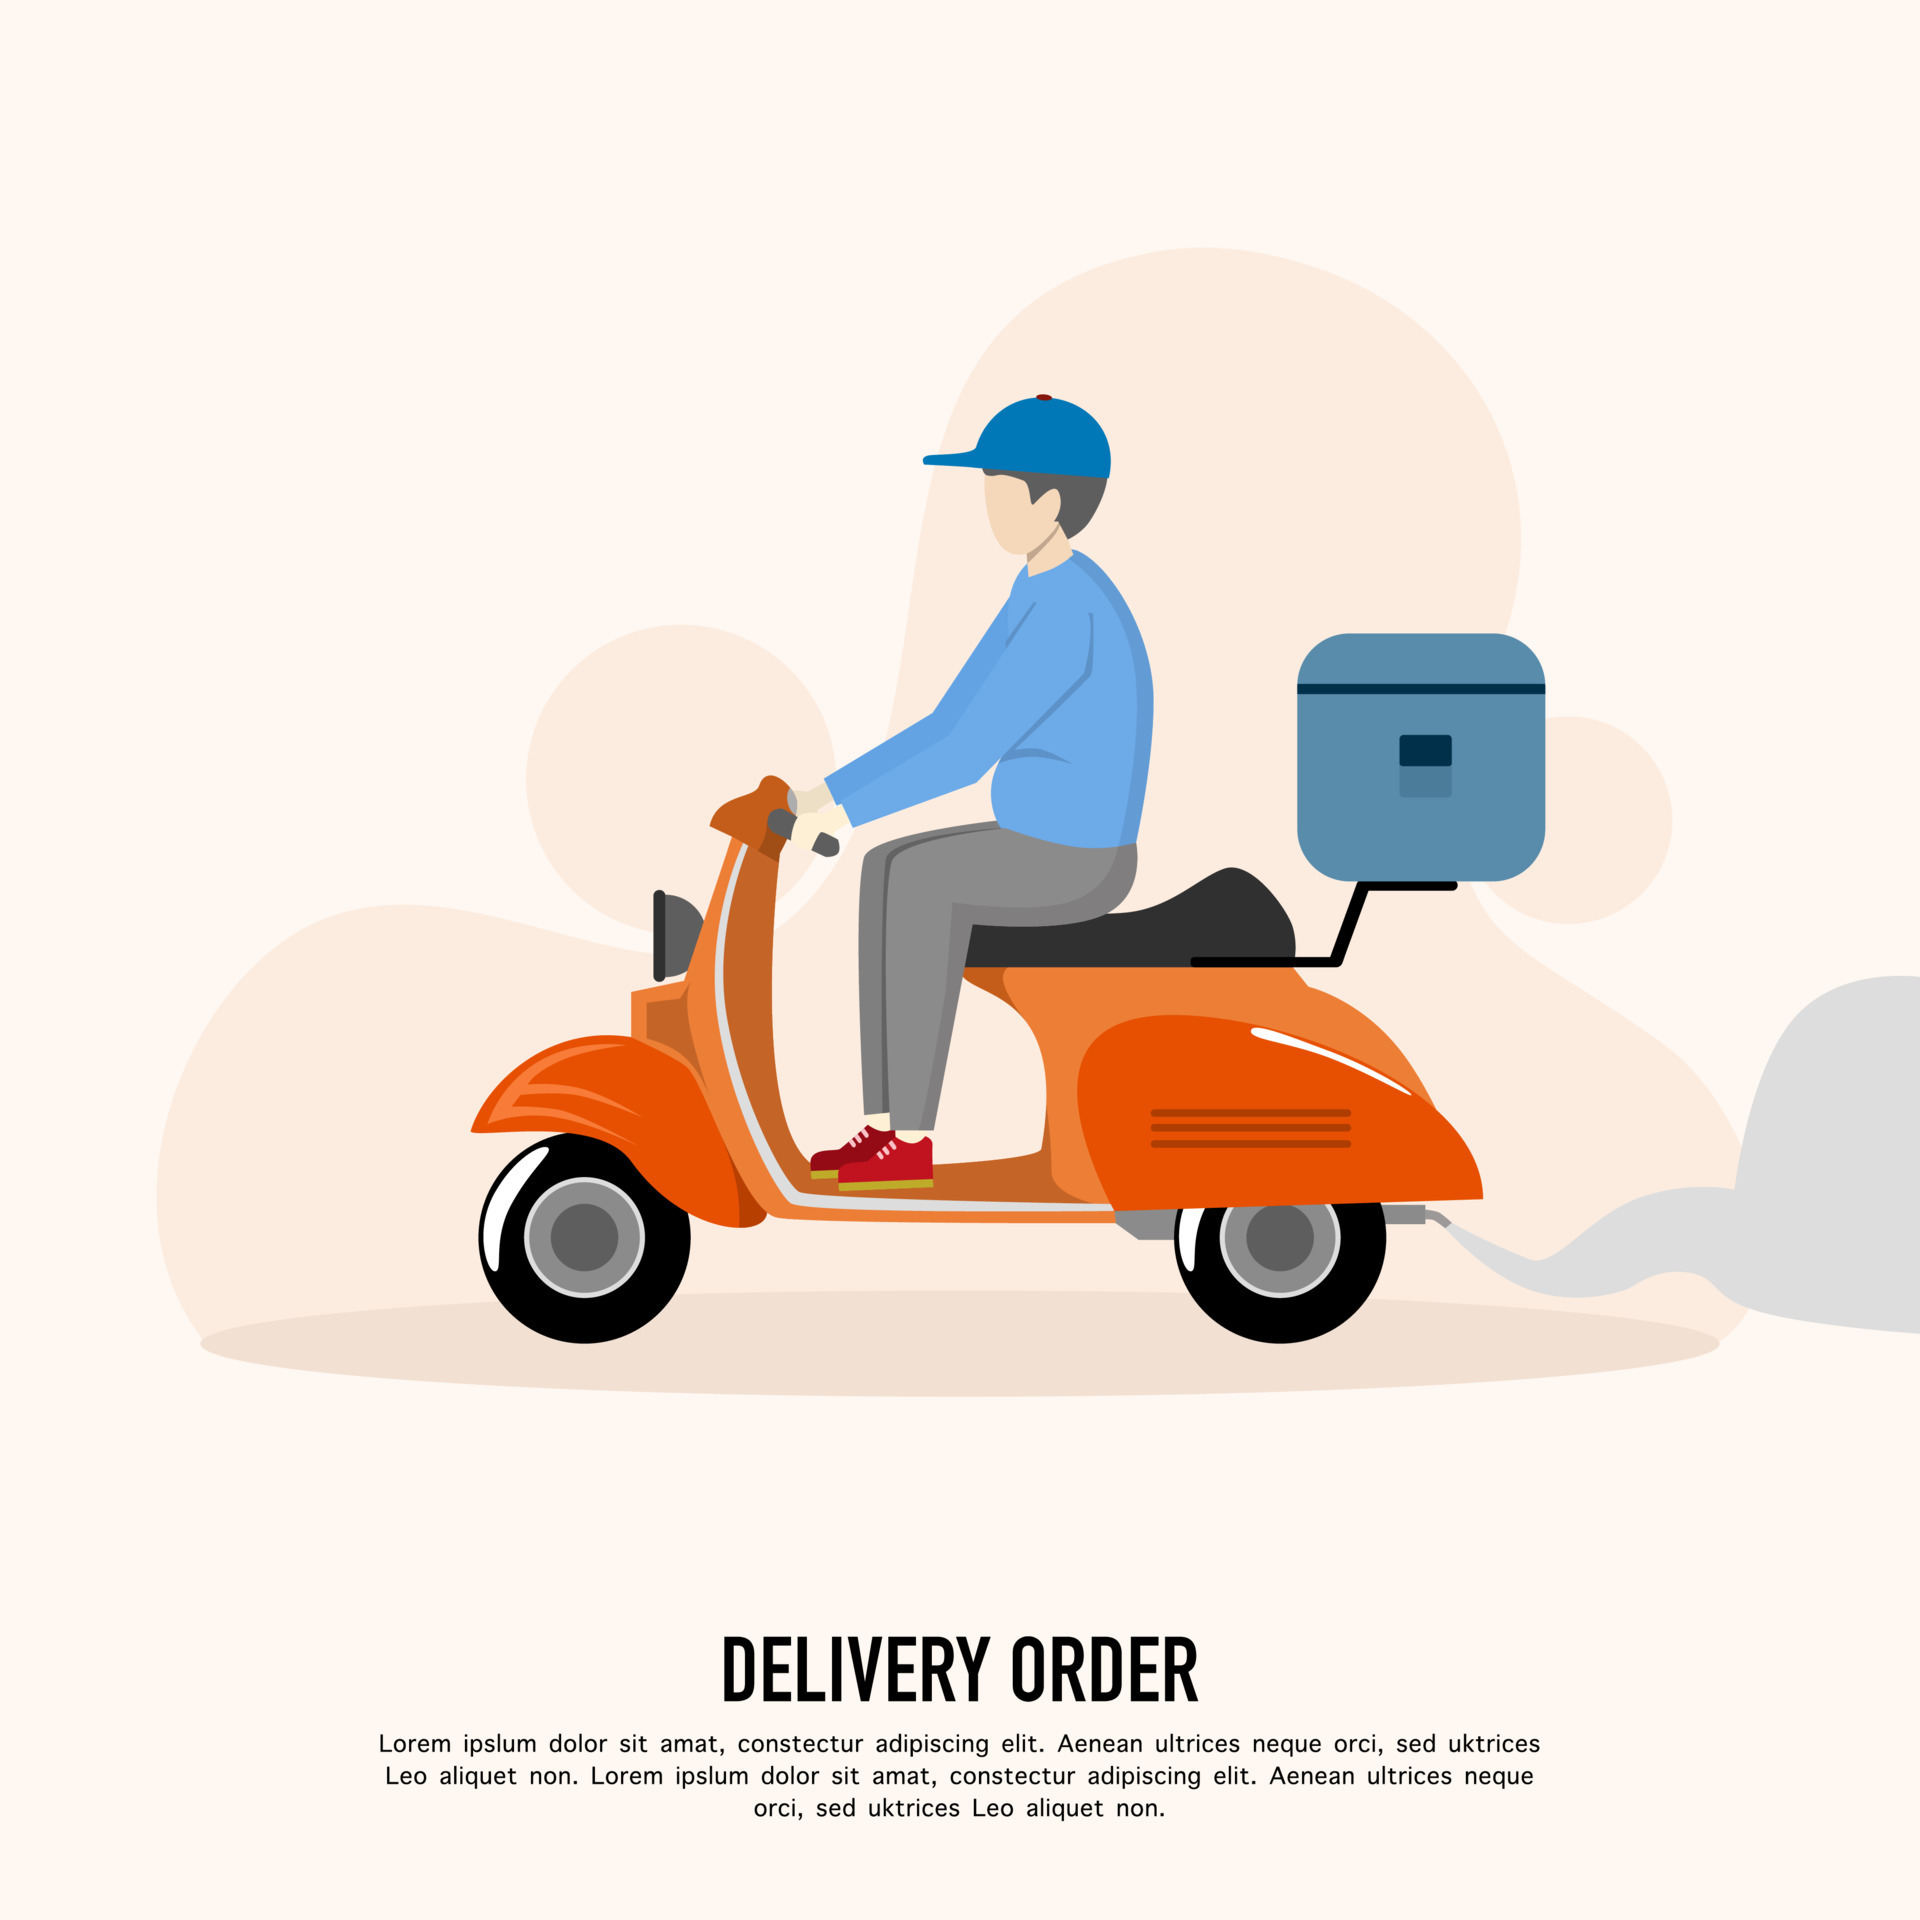 Concept of fast delivery service, online order, home and office delivery